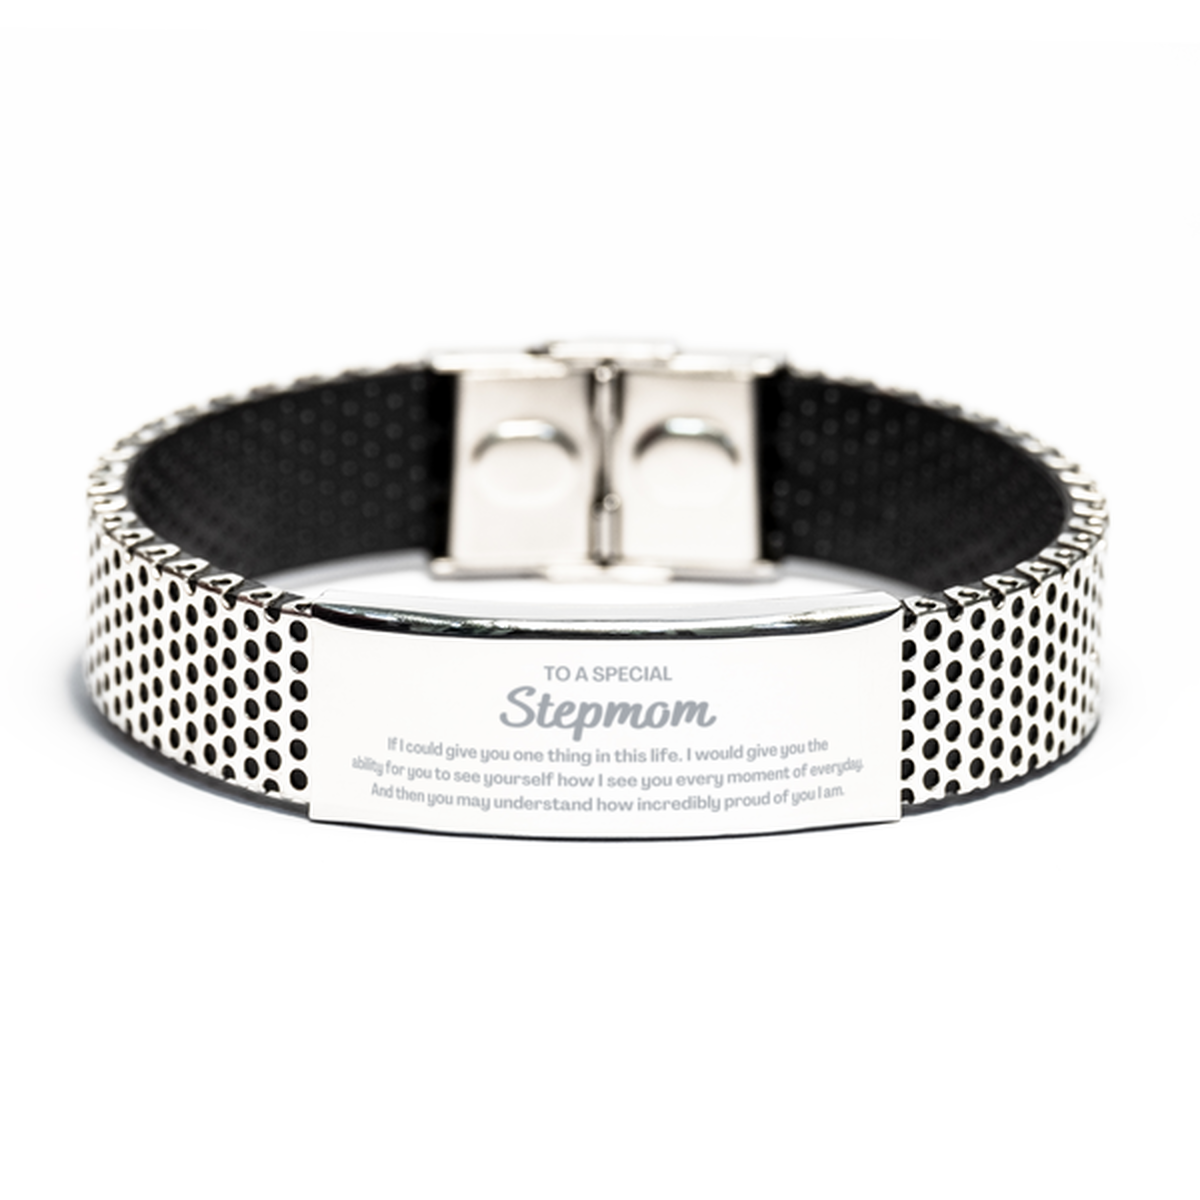 To My Stepmom Stainless Steel Bracelet, Gifts For Stepmom Engraved, Inspirational Gifts for Christmas Birthday, Epic Gifts for Stepmom To A Special Stepmom how incredibly proud of you I am